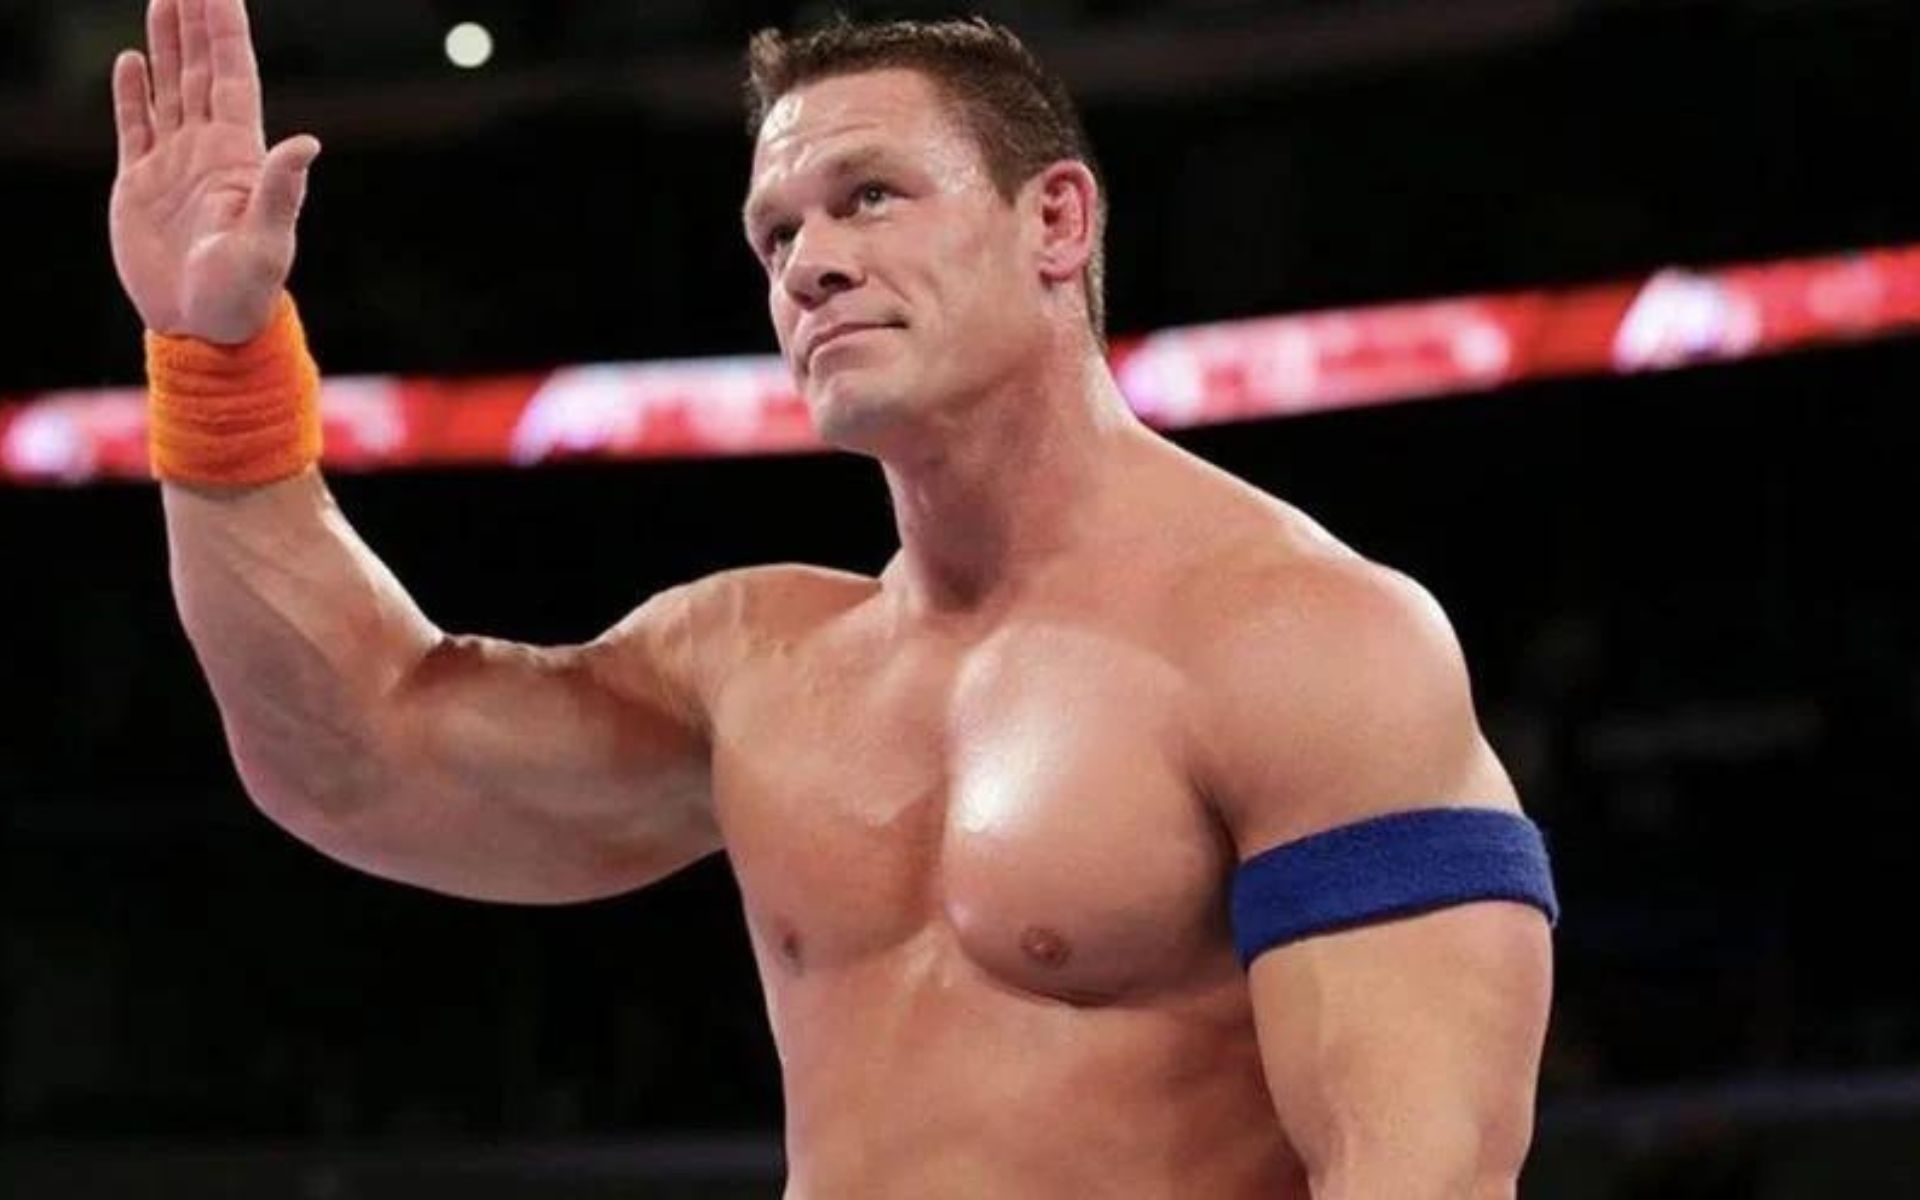 John Cena is celebrating his 20th anniversary with WWE.